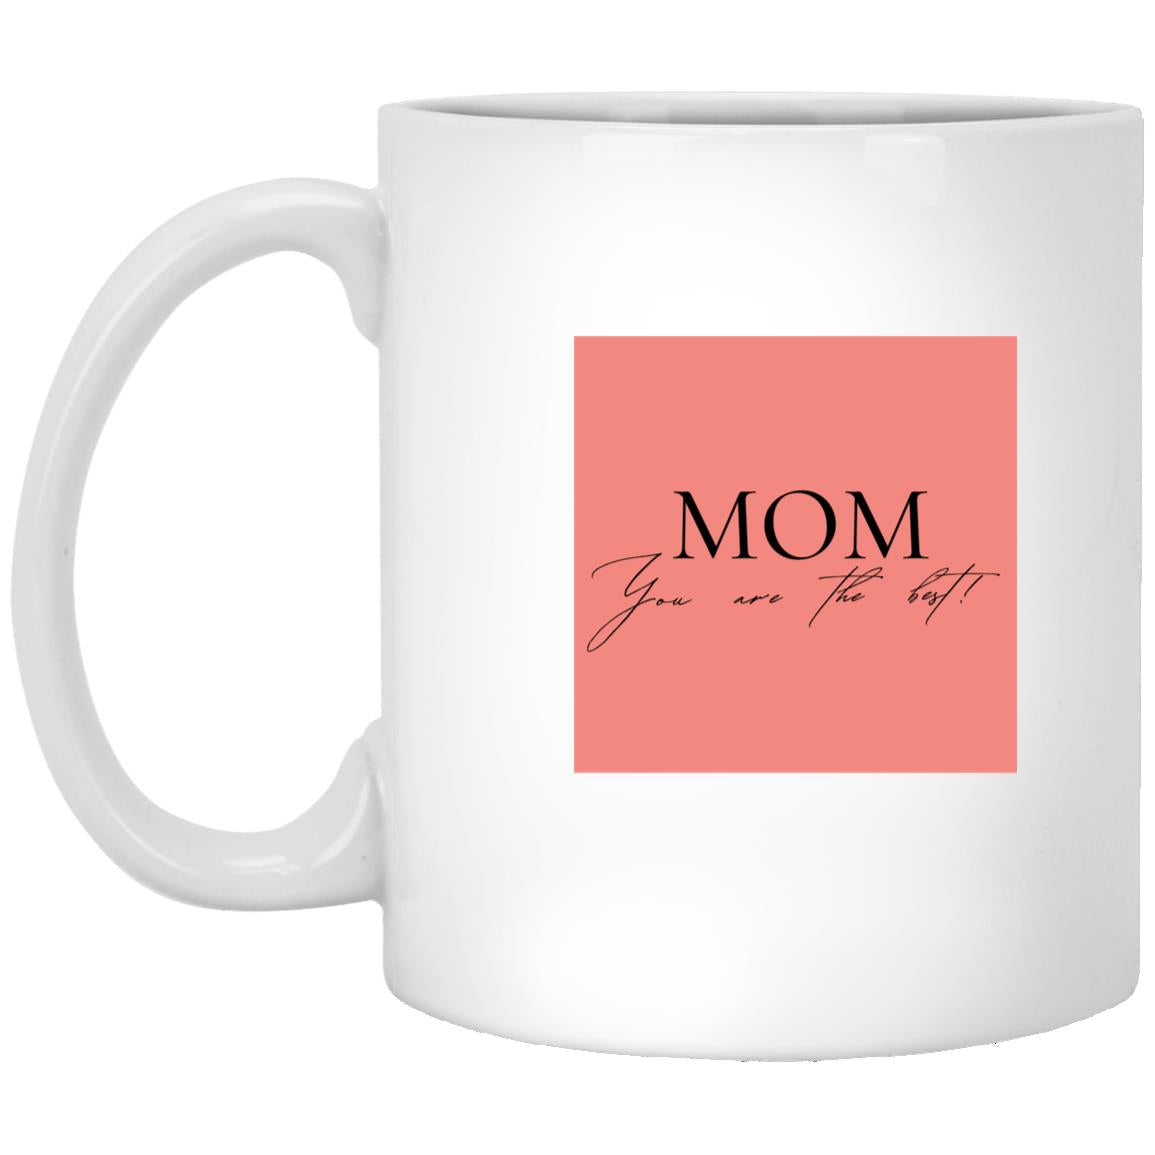 Mom You Are The Best - White Mug Style 35